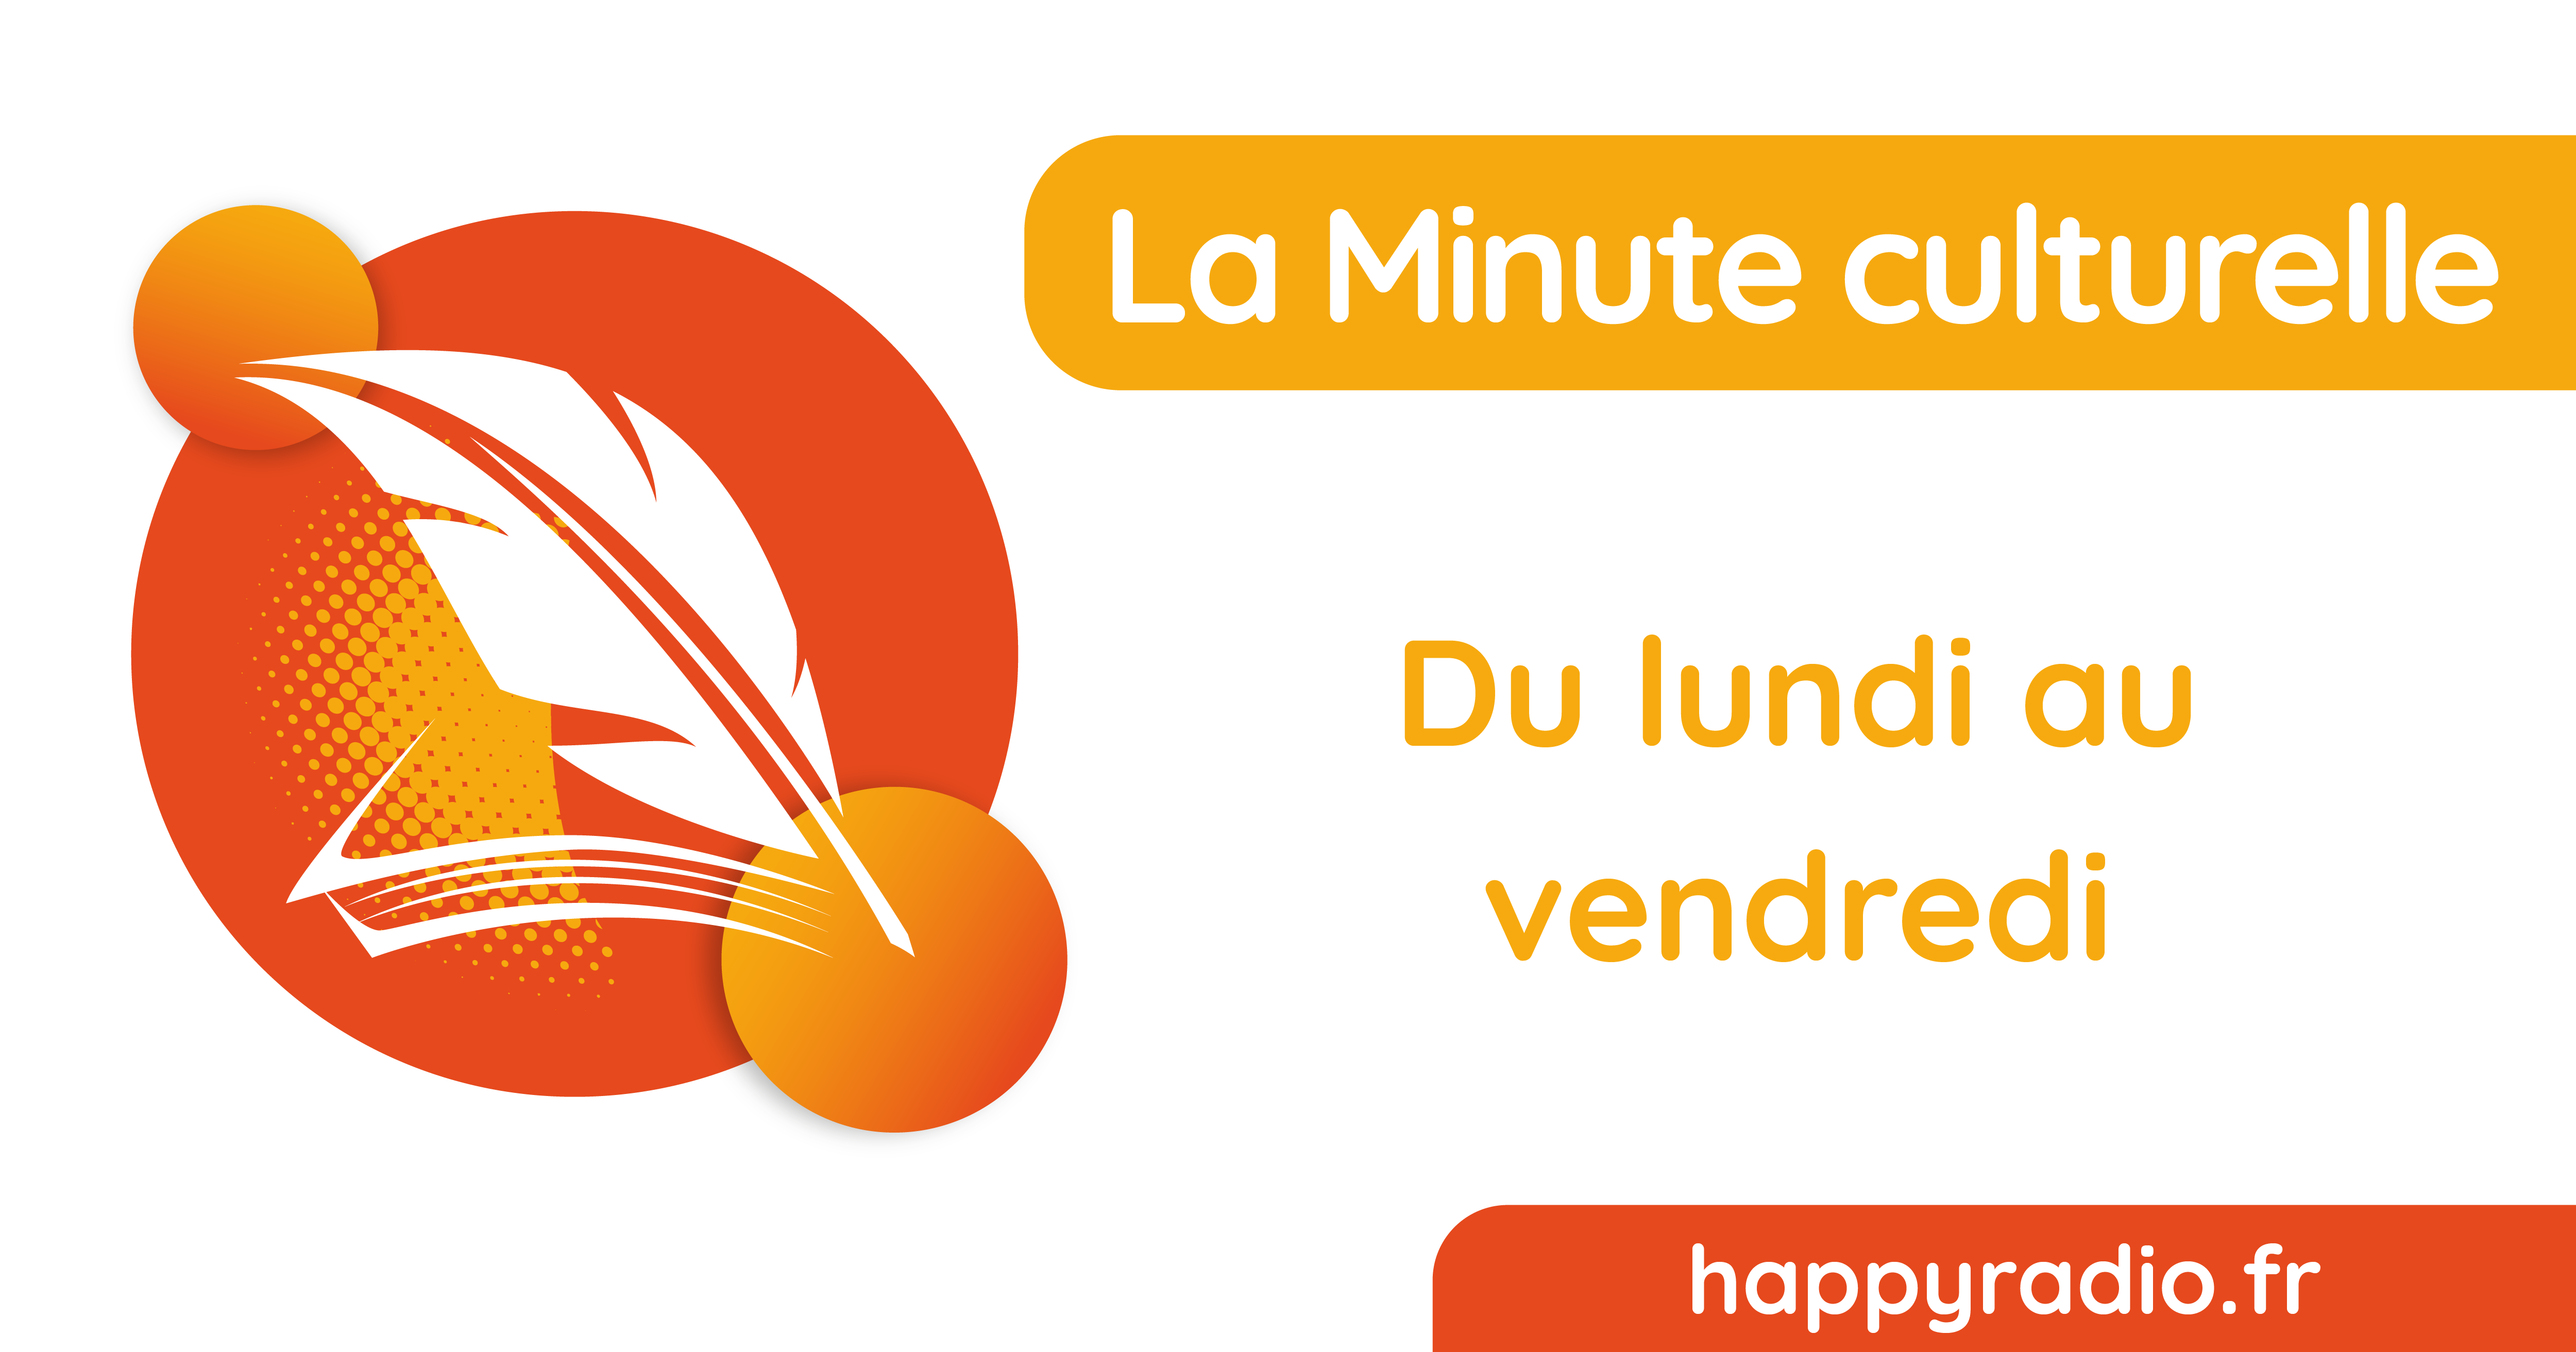 You are currently viewing La Minute culturelle